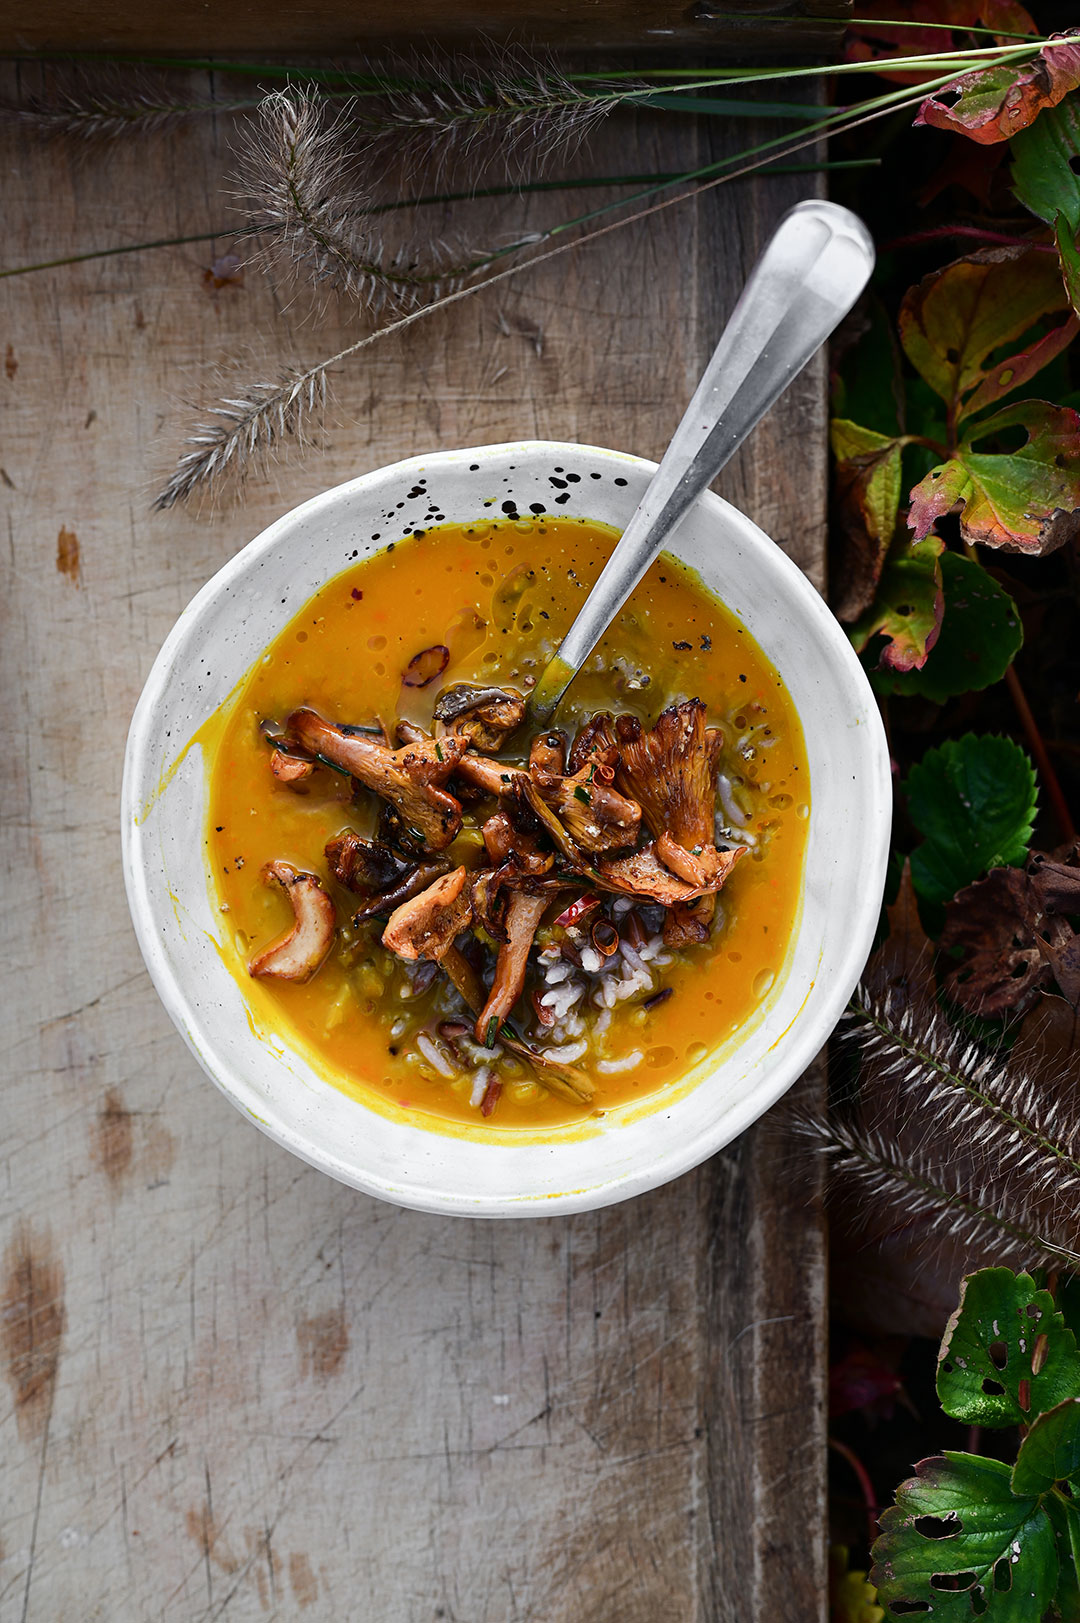 Roasted pumpkin soup with wild rice and miso mushrooms - Serving Dumplings